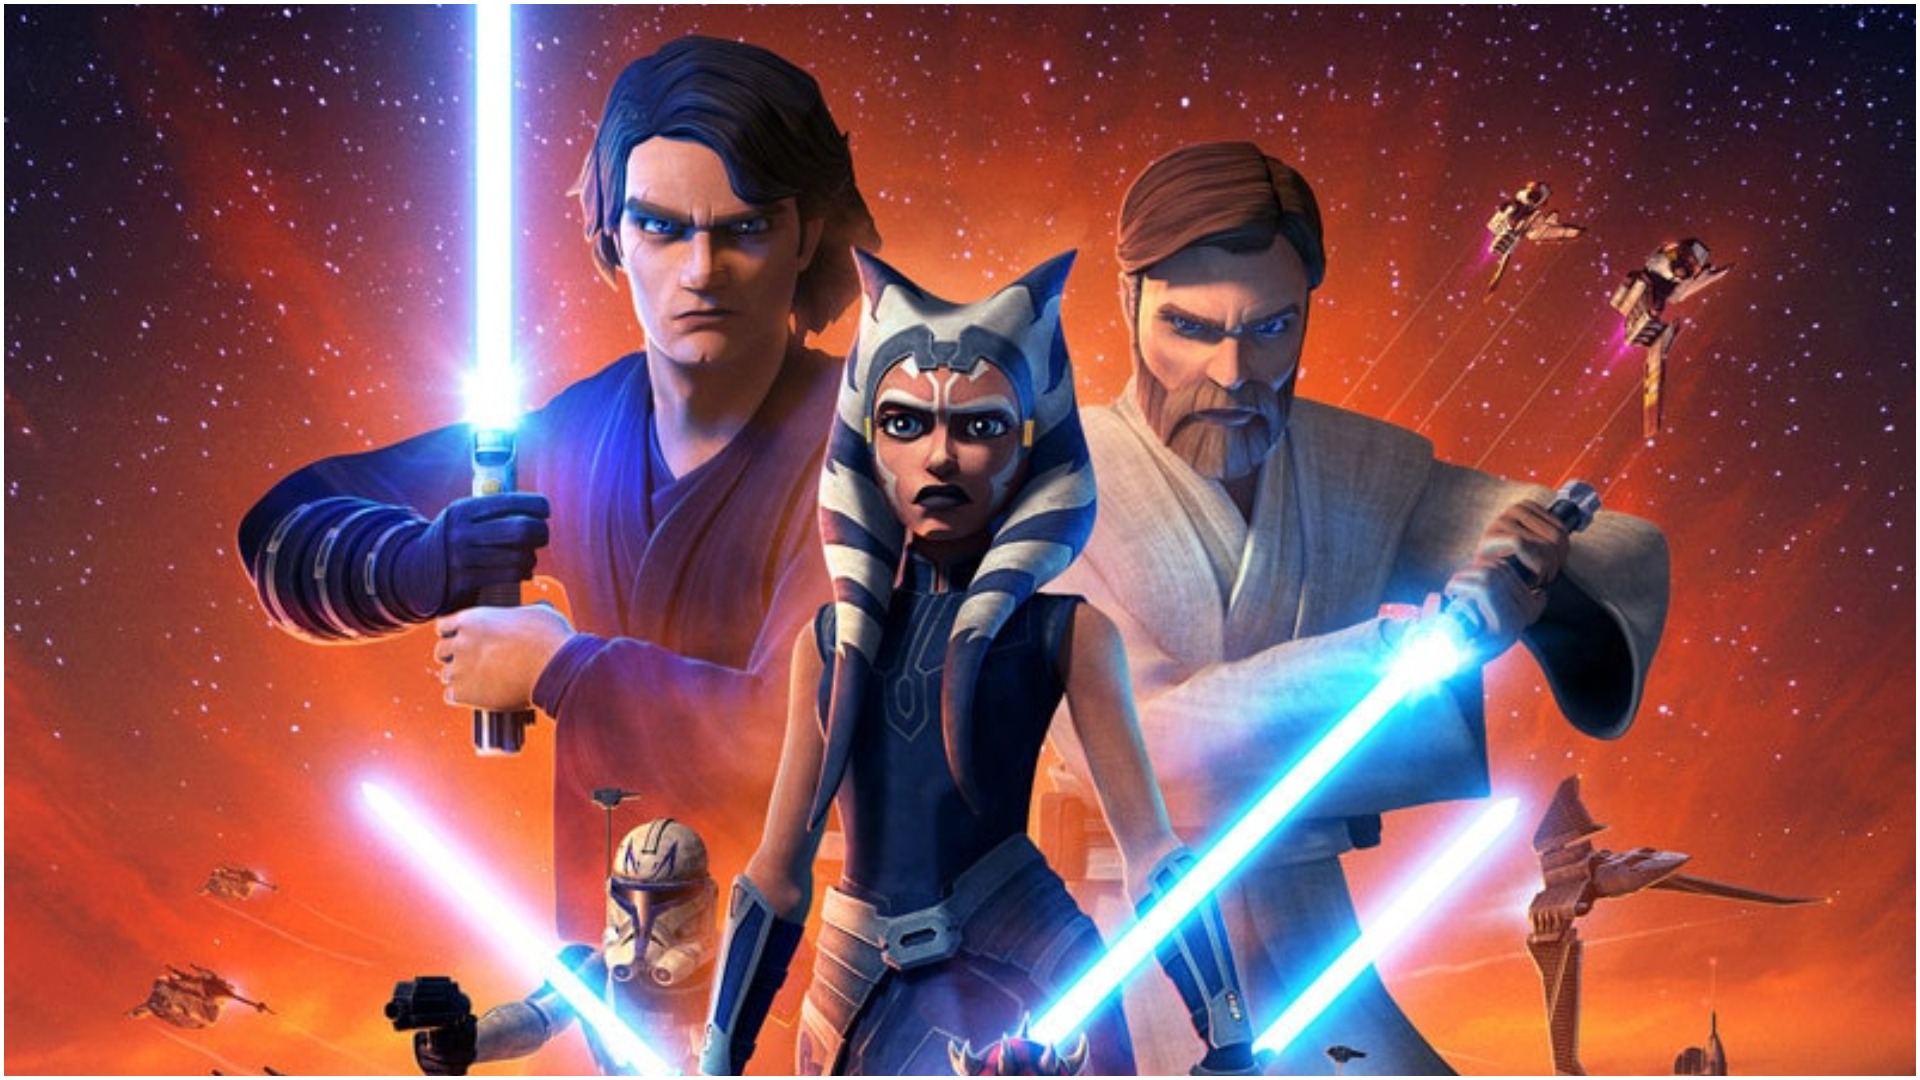 How to watch Star Wars: The Clone Wars in order (release and chronological)